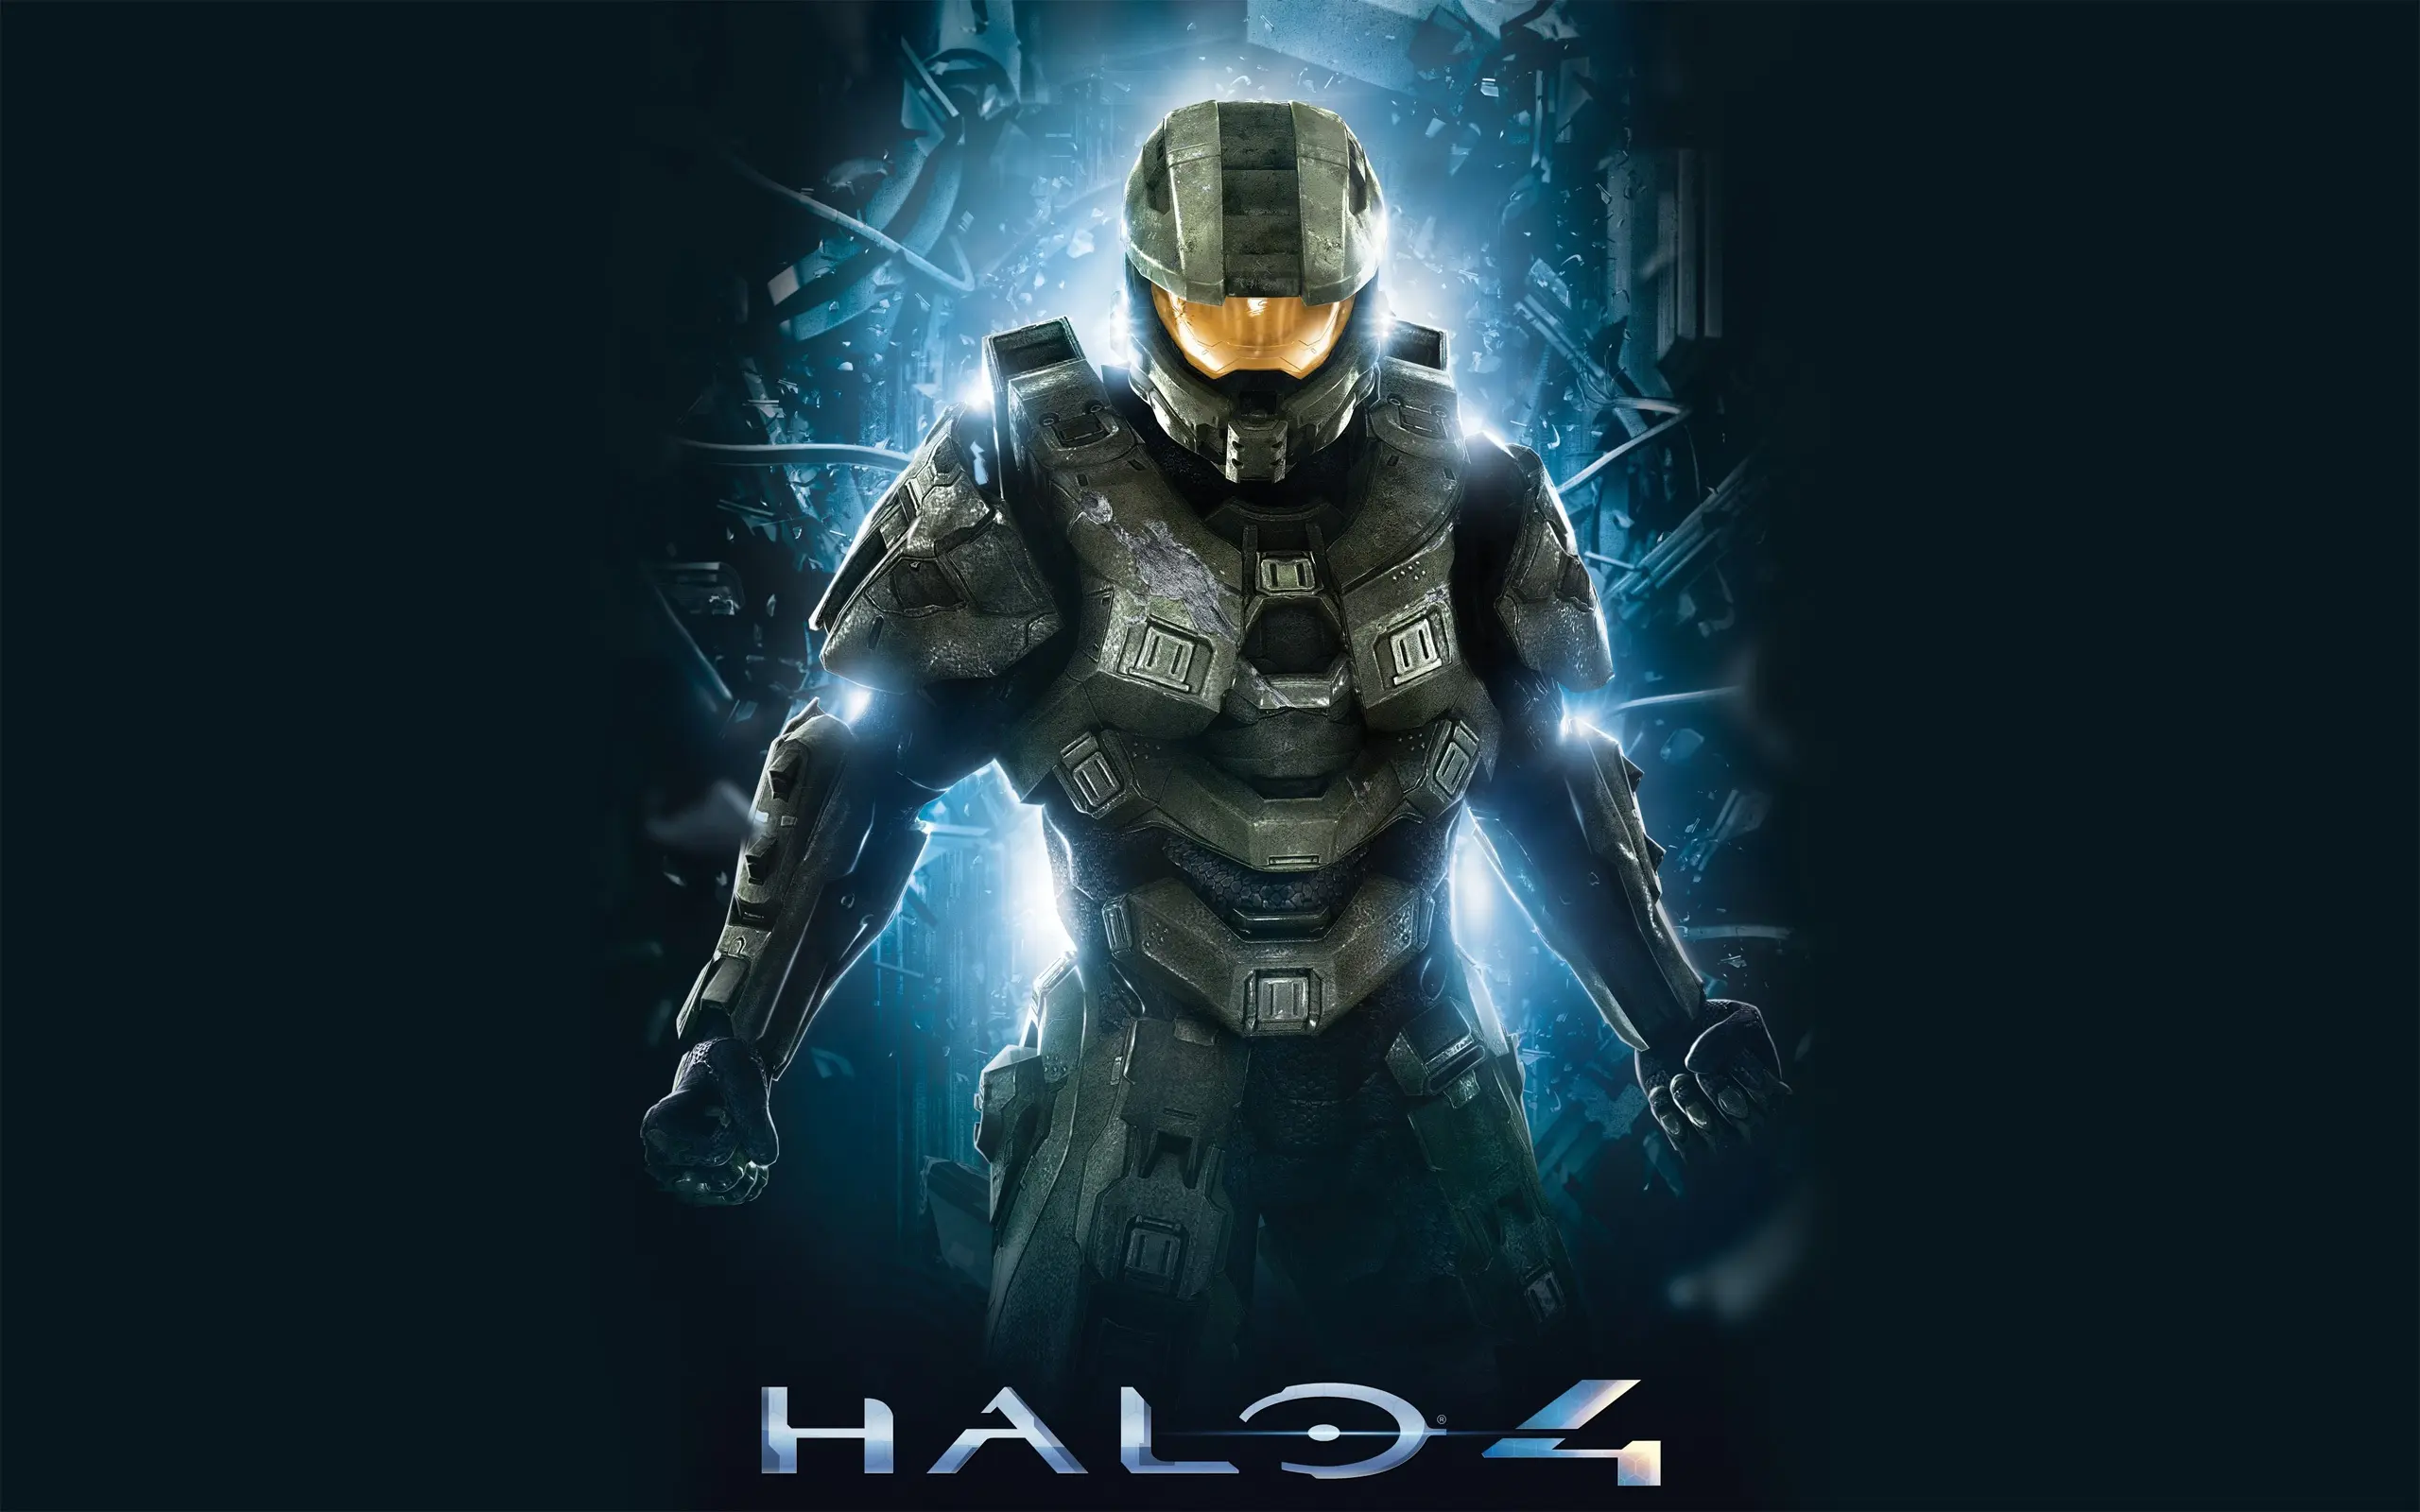 Game Halo 4 wallpaper 5 | Background Image